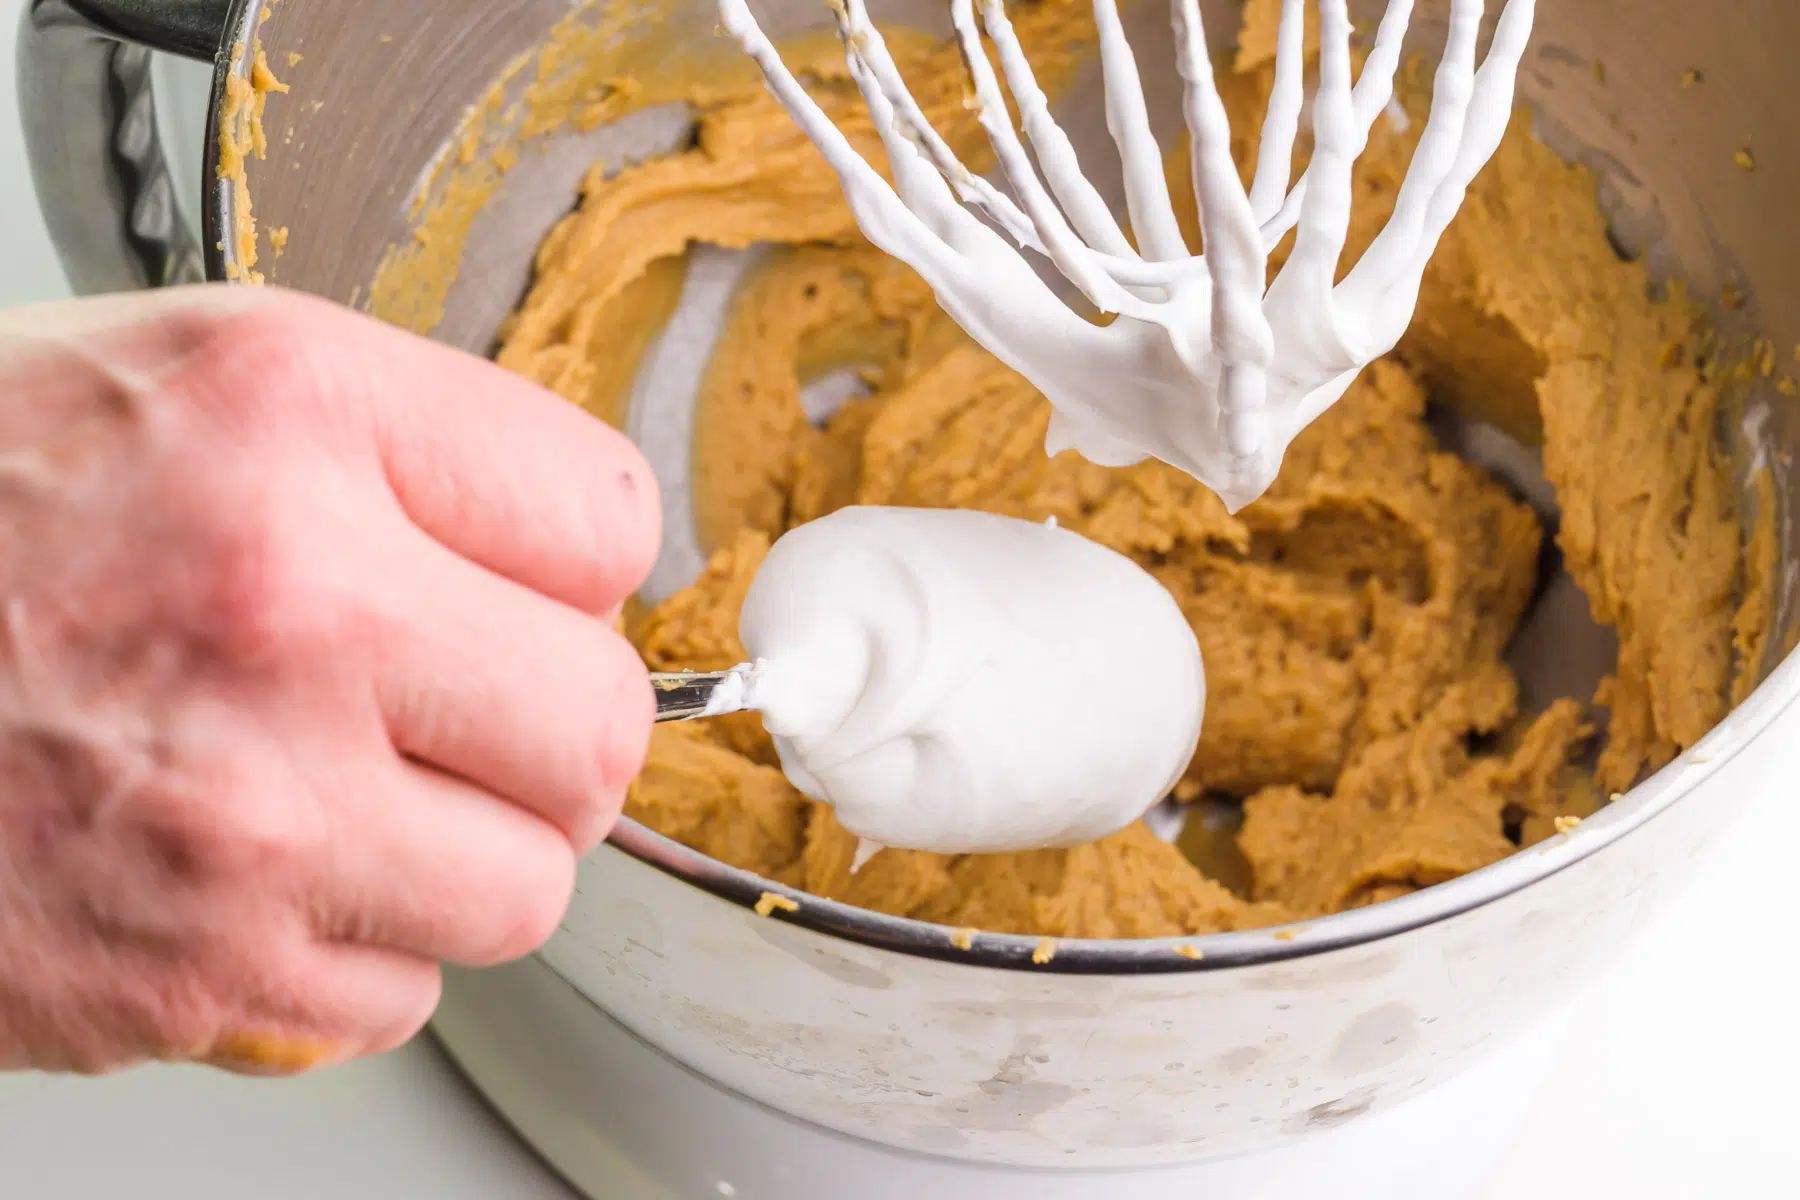 Whipped coconut topping is being added to a peanut butter mixture in a mixing bowl.